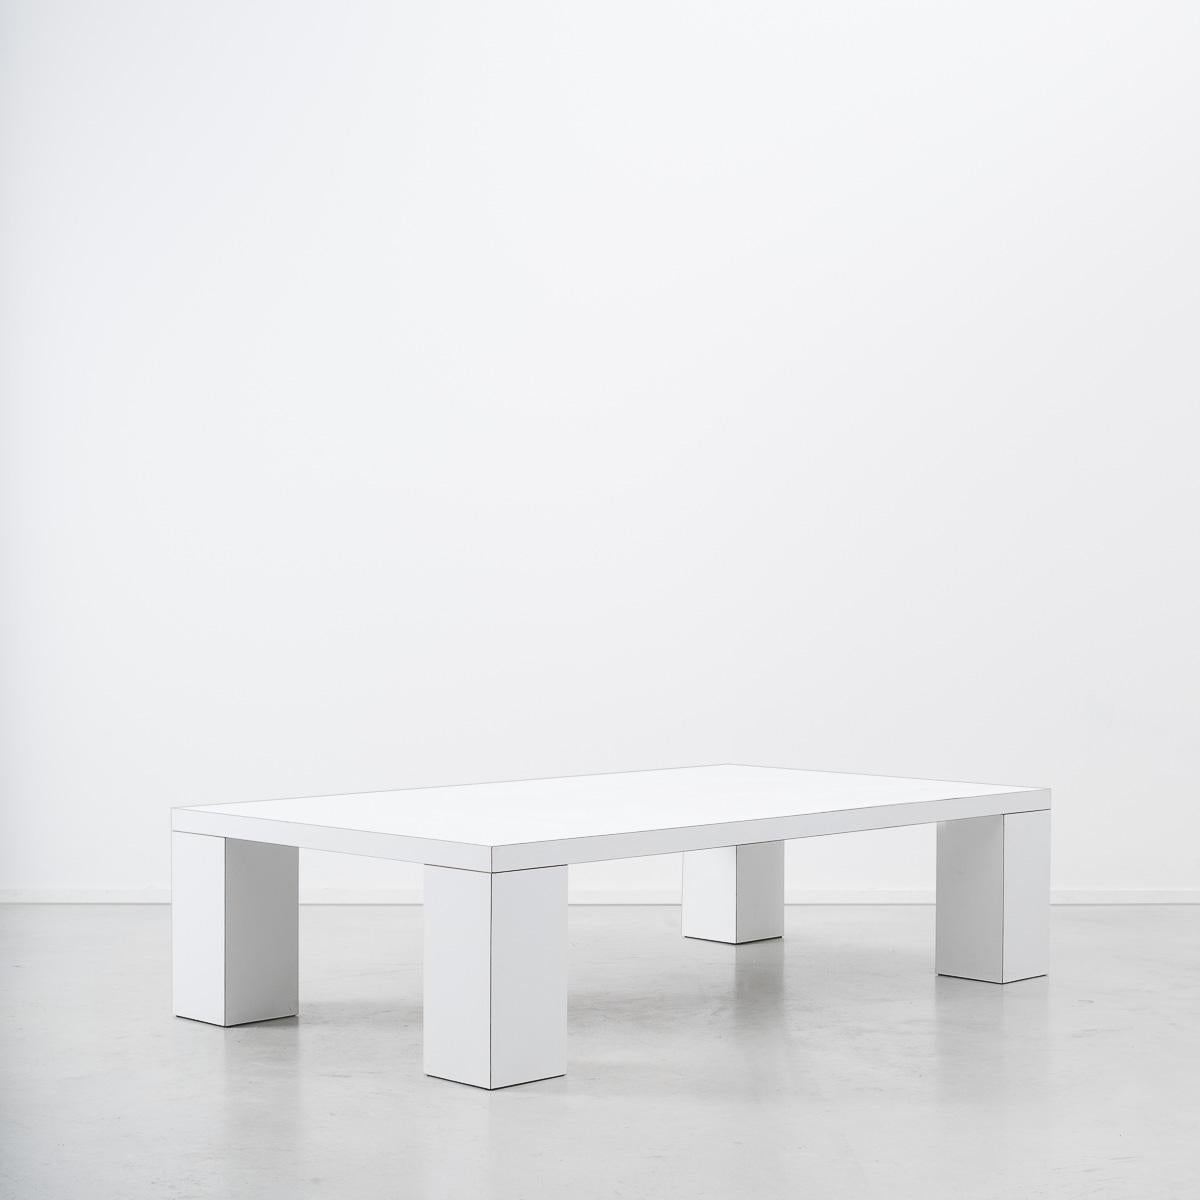 Late 20th Century Minimalist Metaform Coffee Table from the 1970s